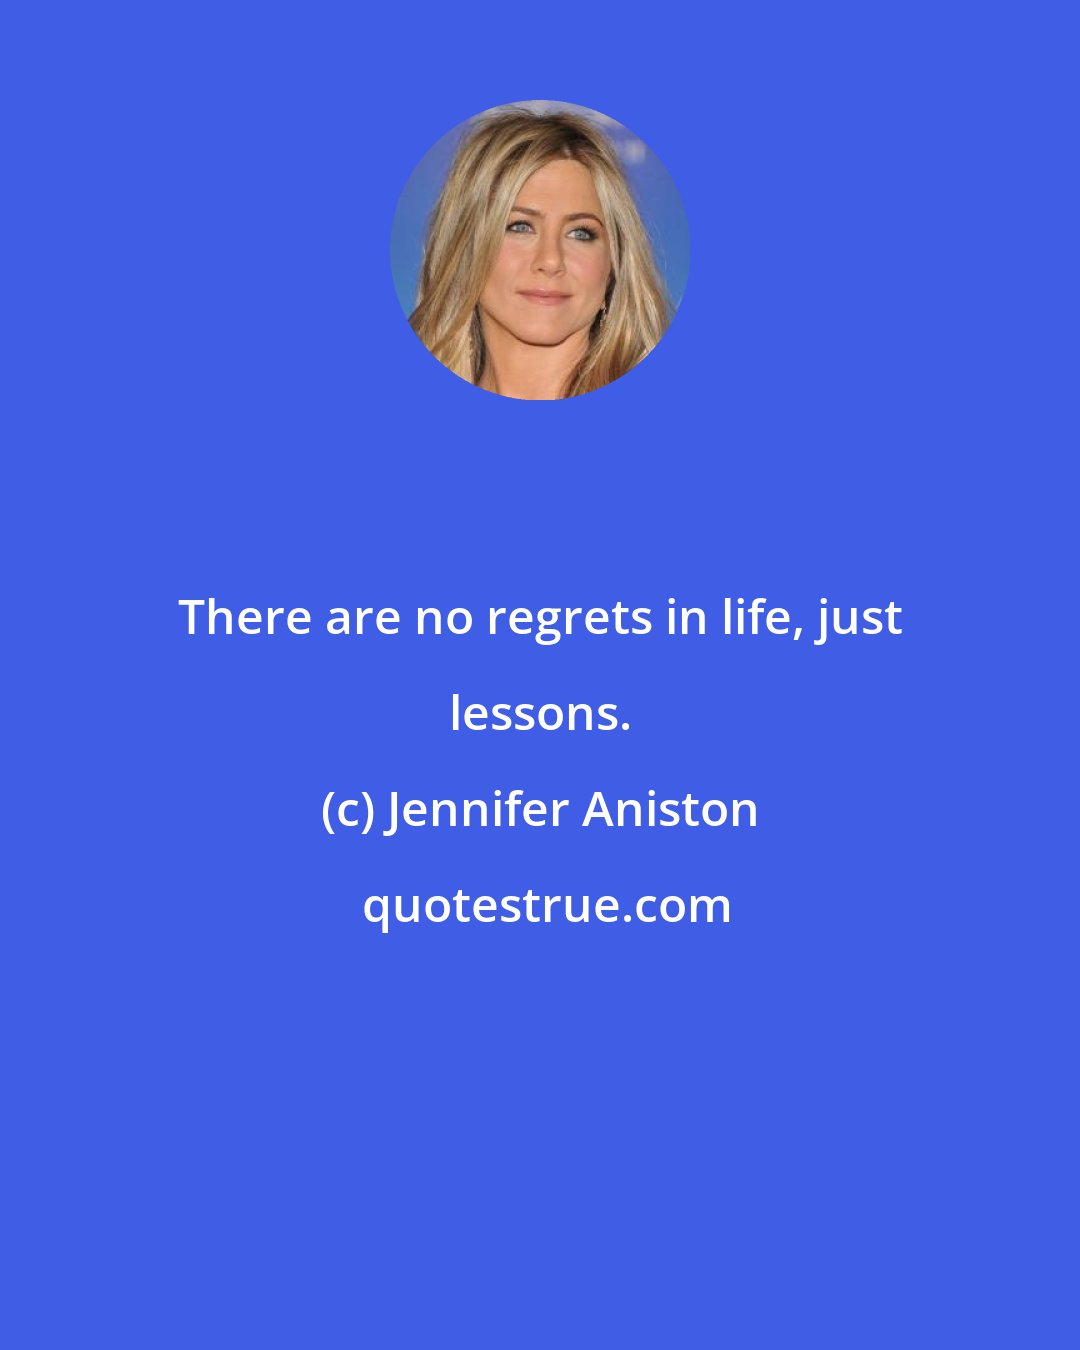 Jennifer Aniston: There are no regrets in life, just lessons.